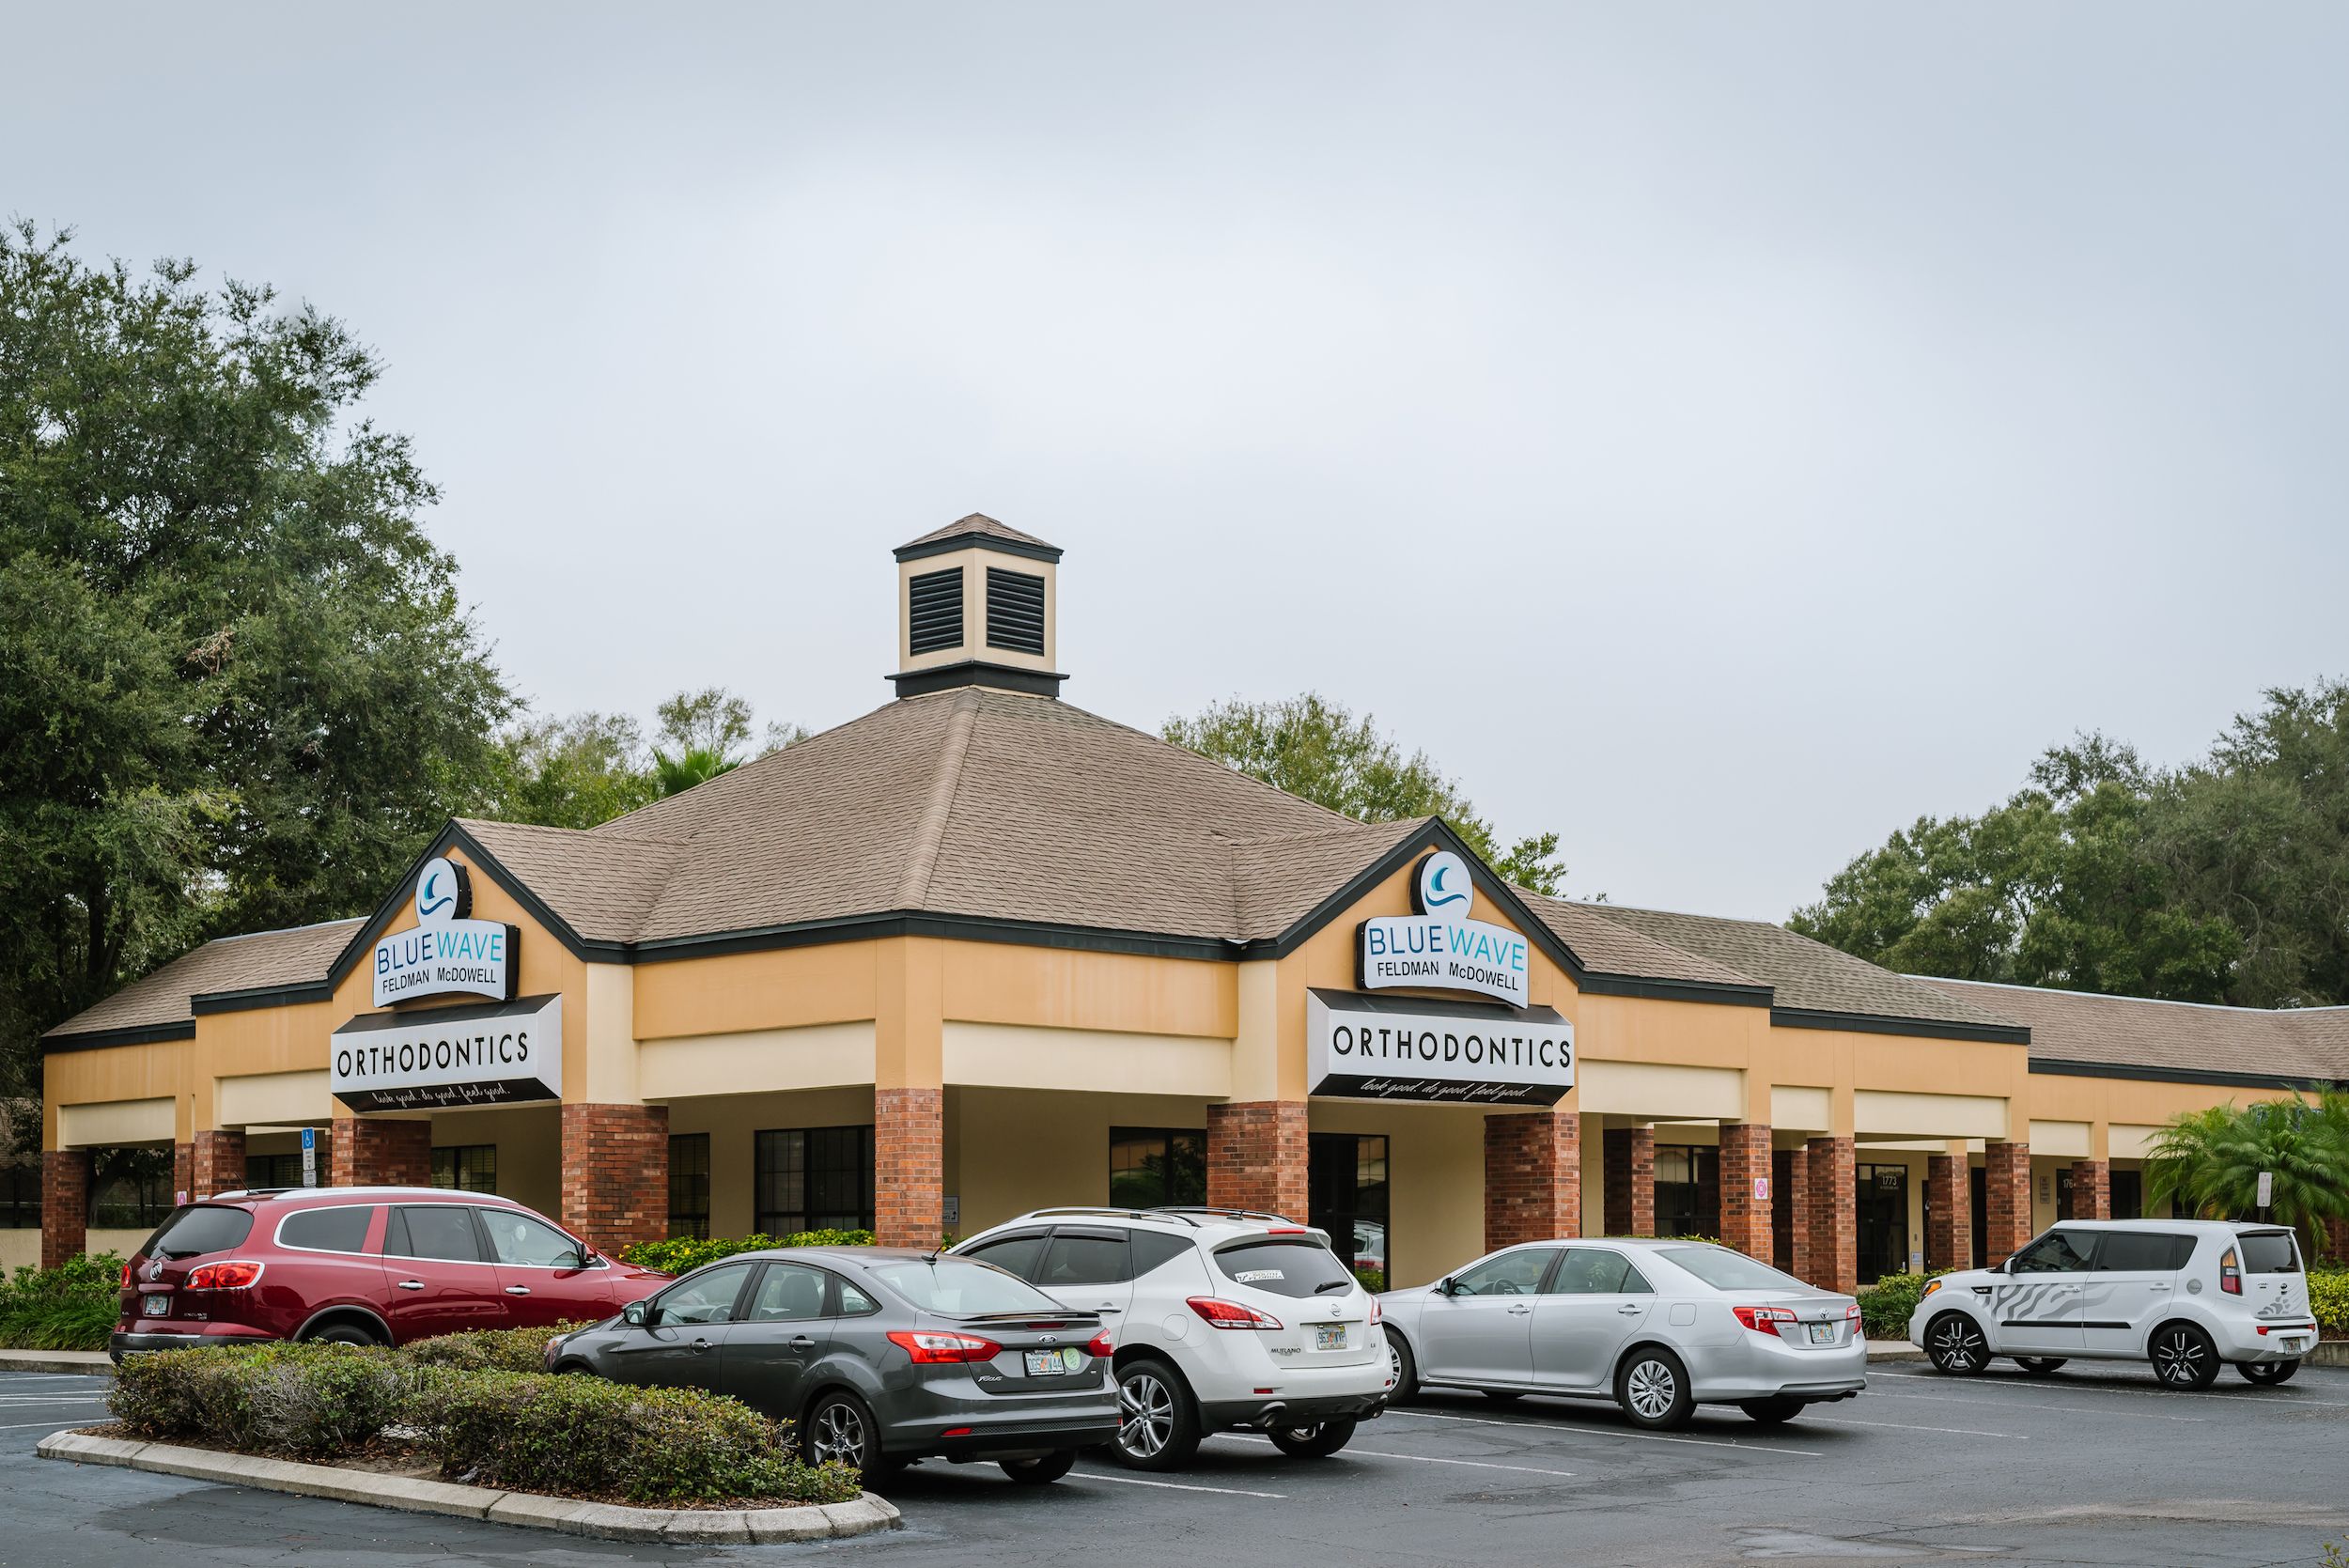 An image of the Blue Wave Orthodontics building located in Florida.